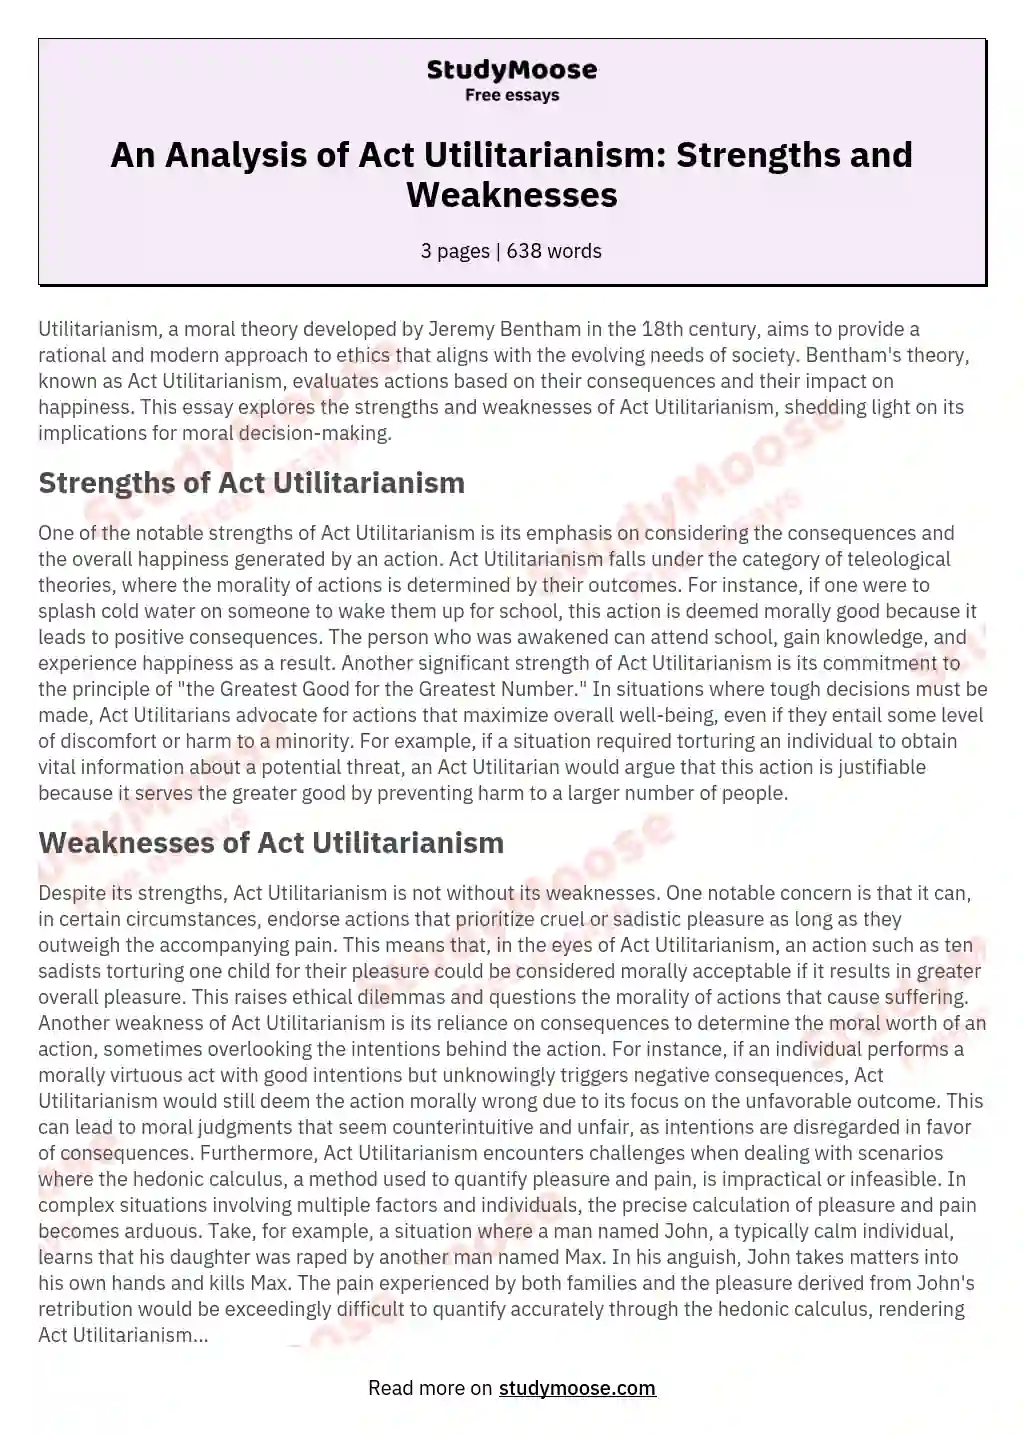 An Analysis of Act Utilitarianism: Strengths and Weaknesses essay